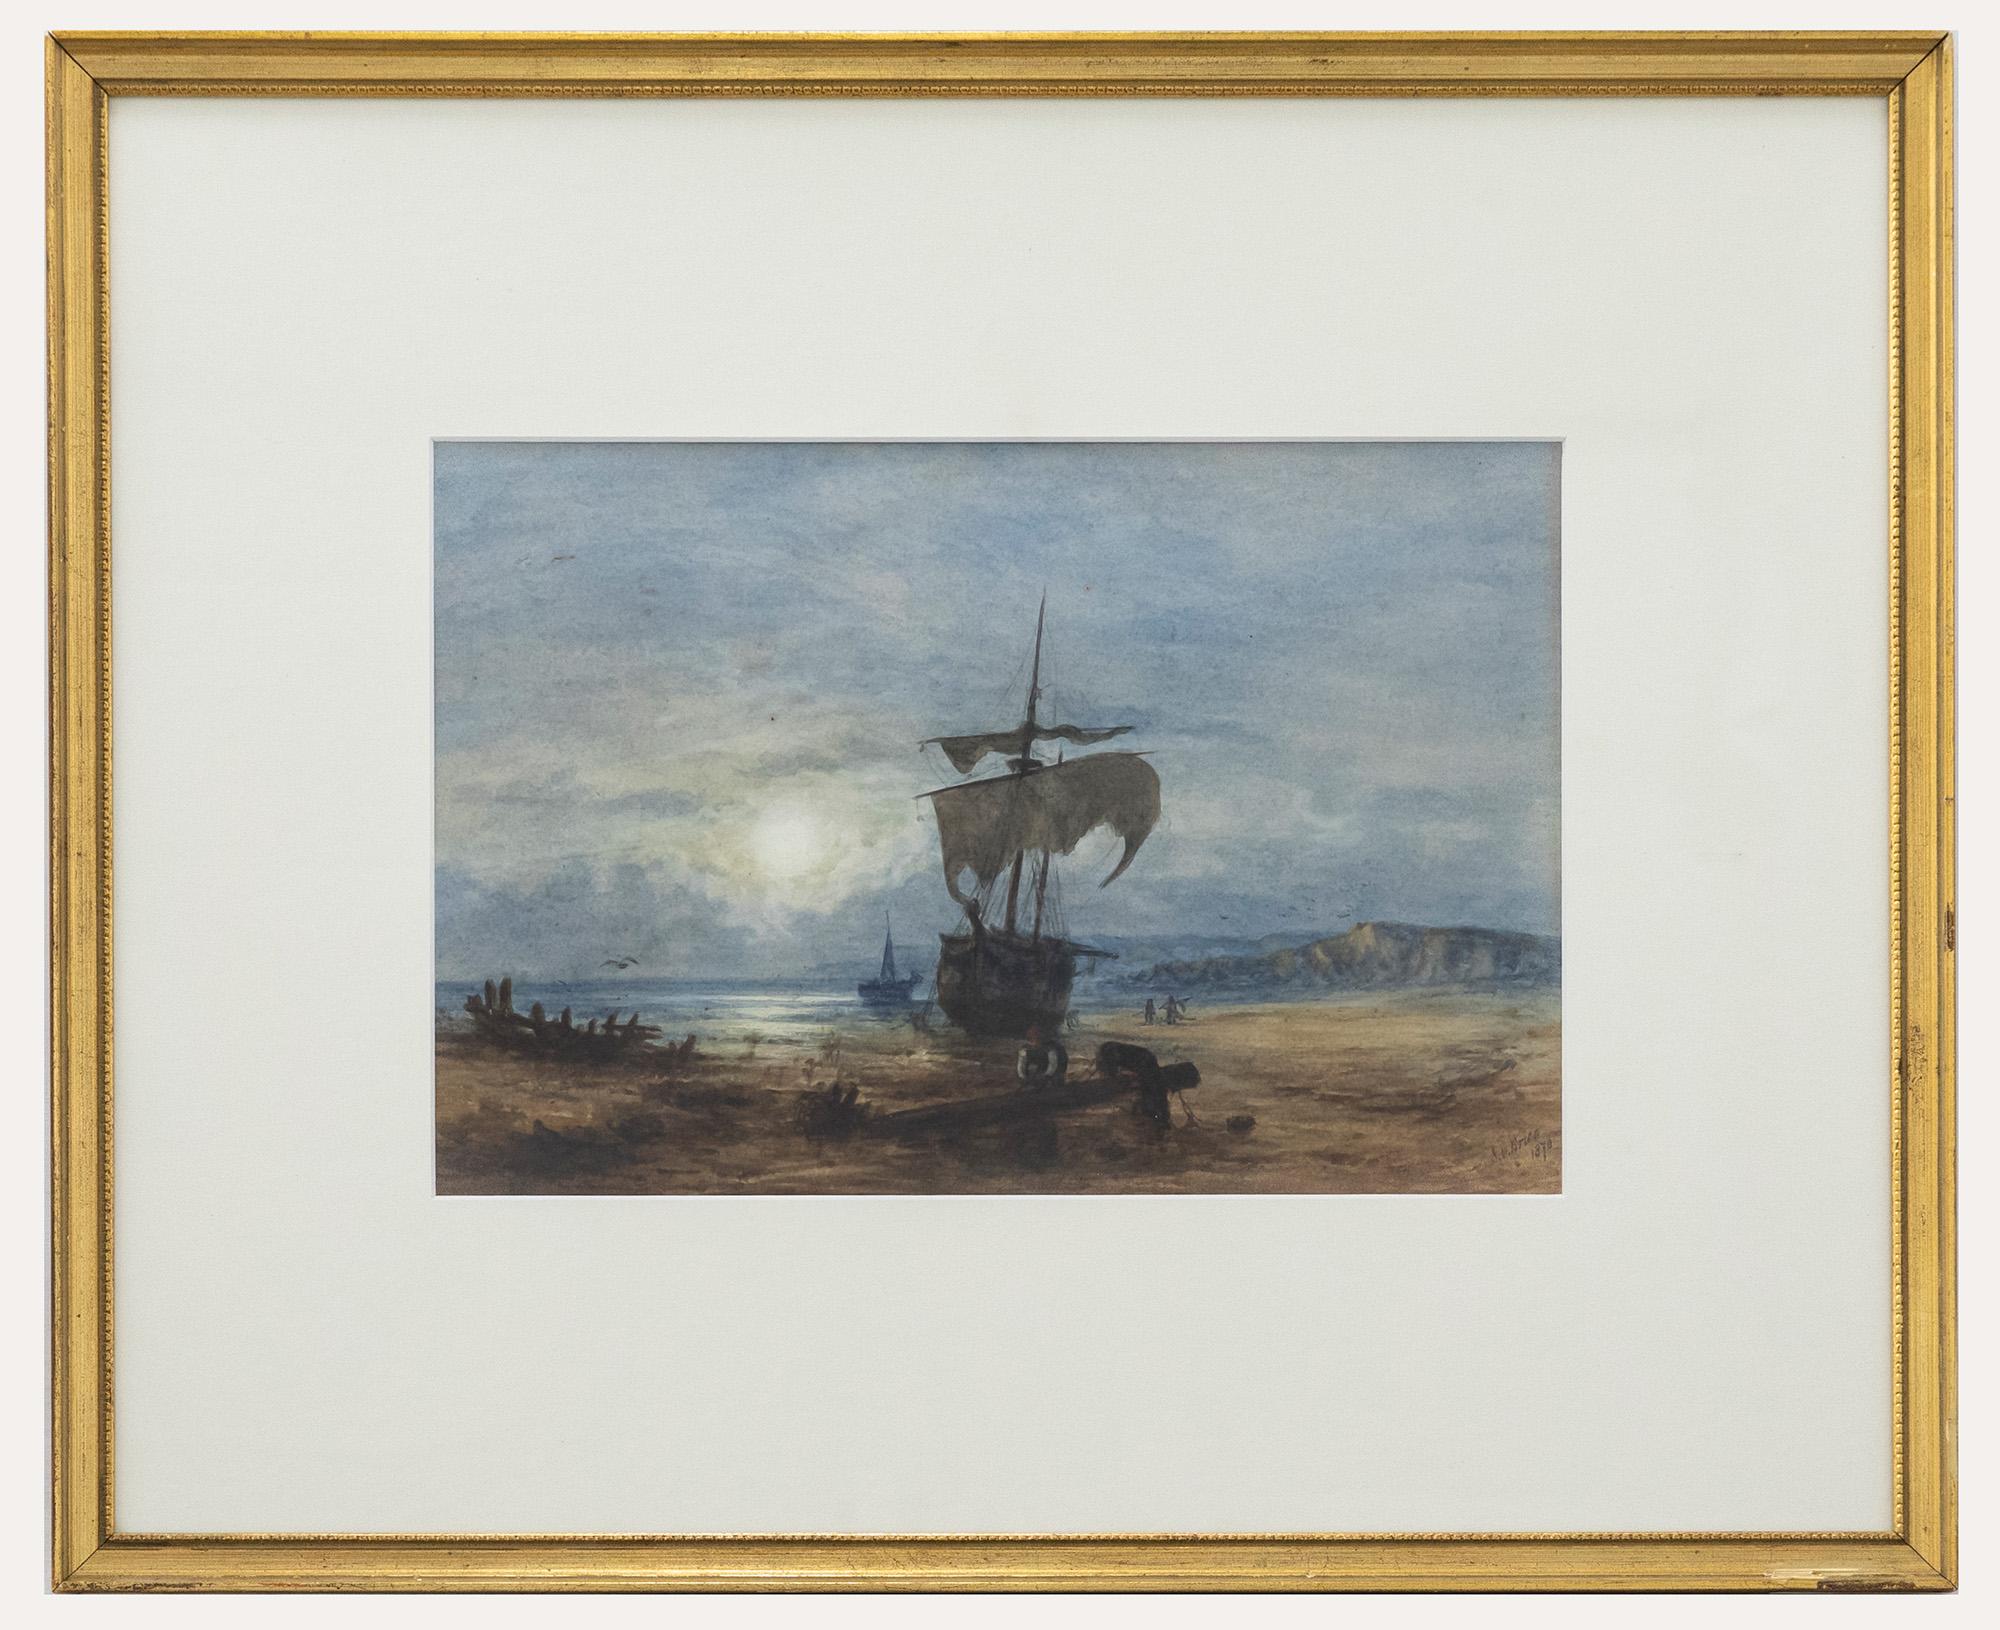 A charming seascape in watercolour, by the well listed artist George S. Walters (1838-1924). The painting shows a stranded ship at low tide. A figure can be scene busy in the foreground gathering rope from a broken mast uncovered by the sea. The